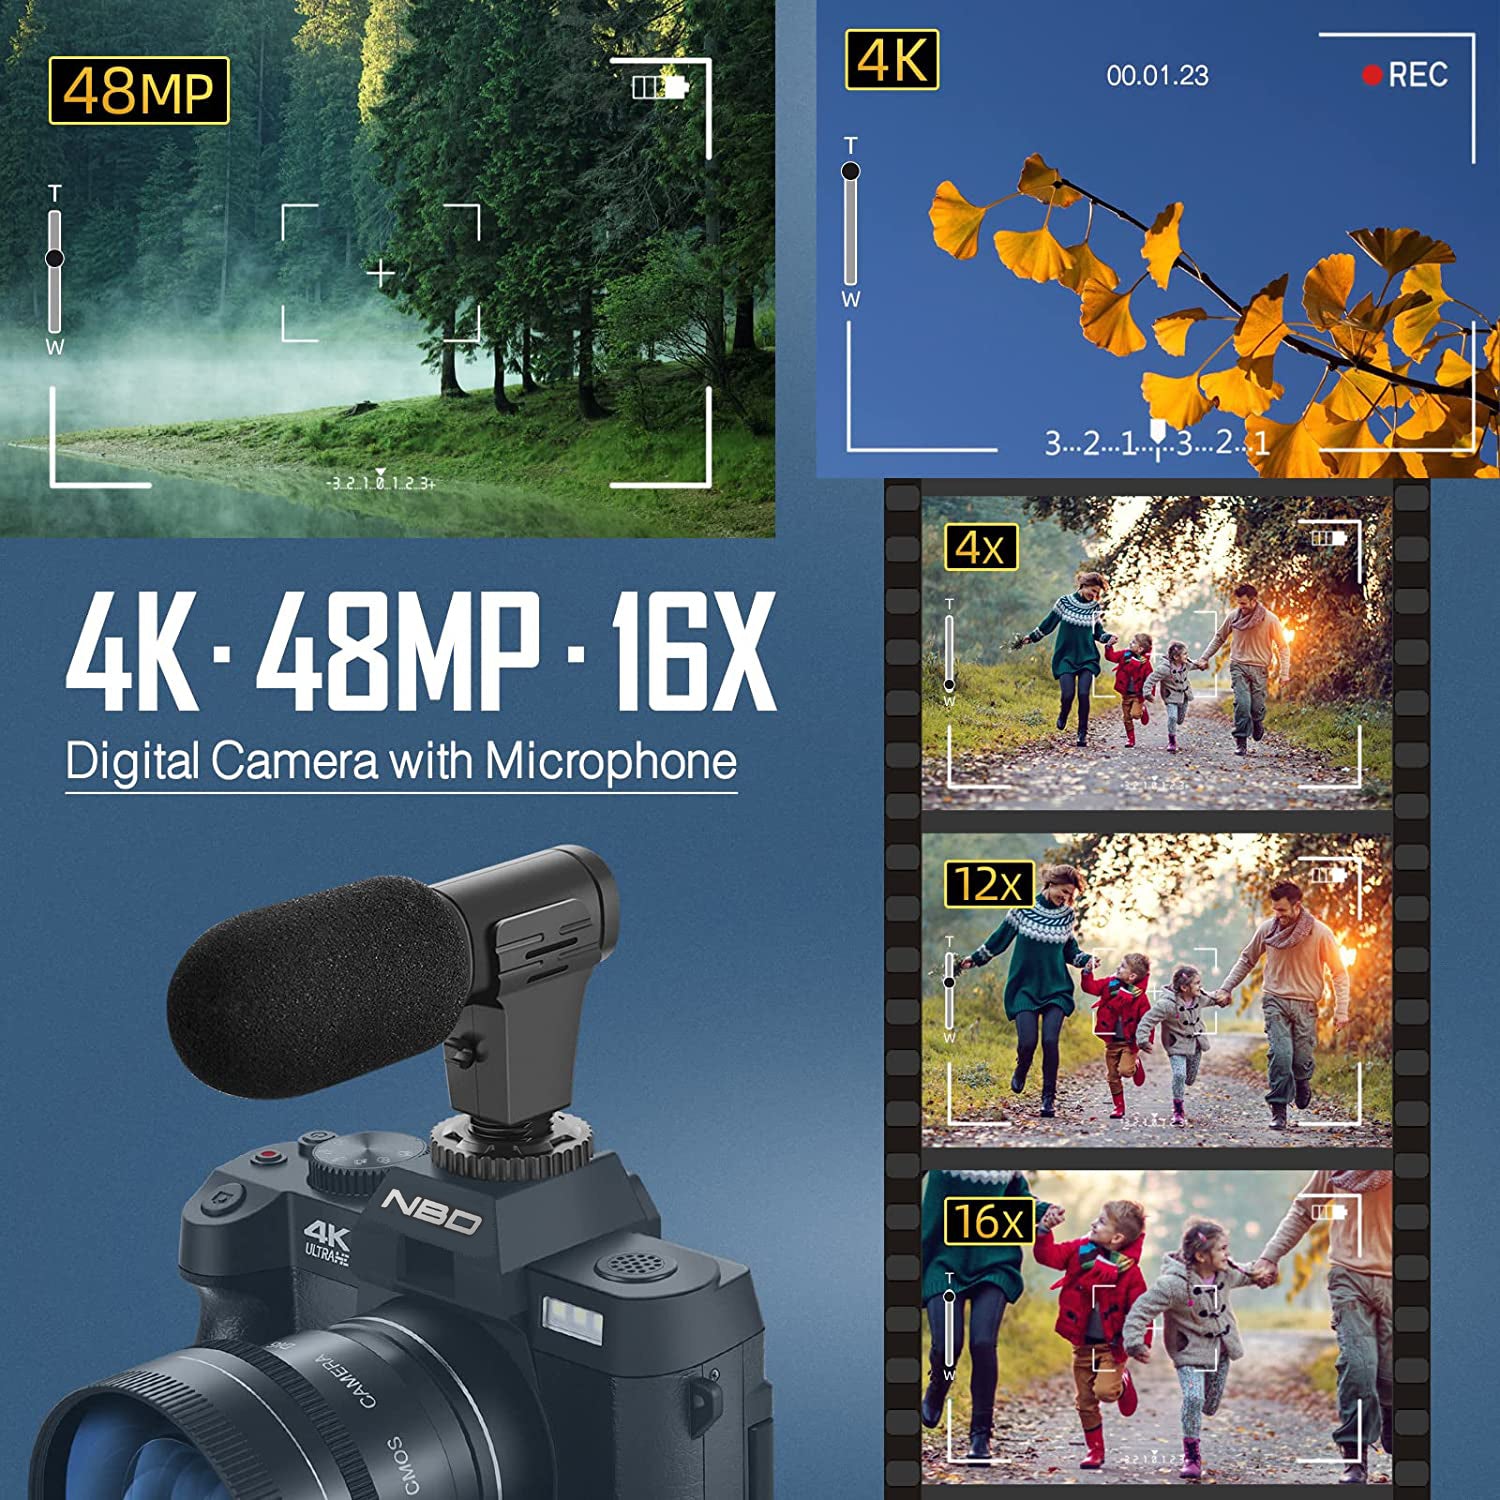 NBD 4K Digital Camera for Photography 48MP Vlogging Camera for Youtube with Microphone, WiFi, 3-Color Filter and Tripod Grip, Video Camera with Wide-Angle&Macro Lens